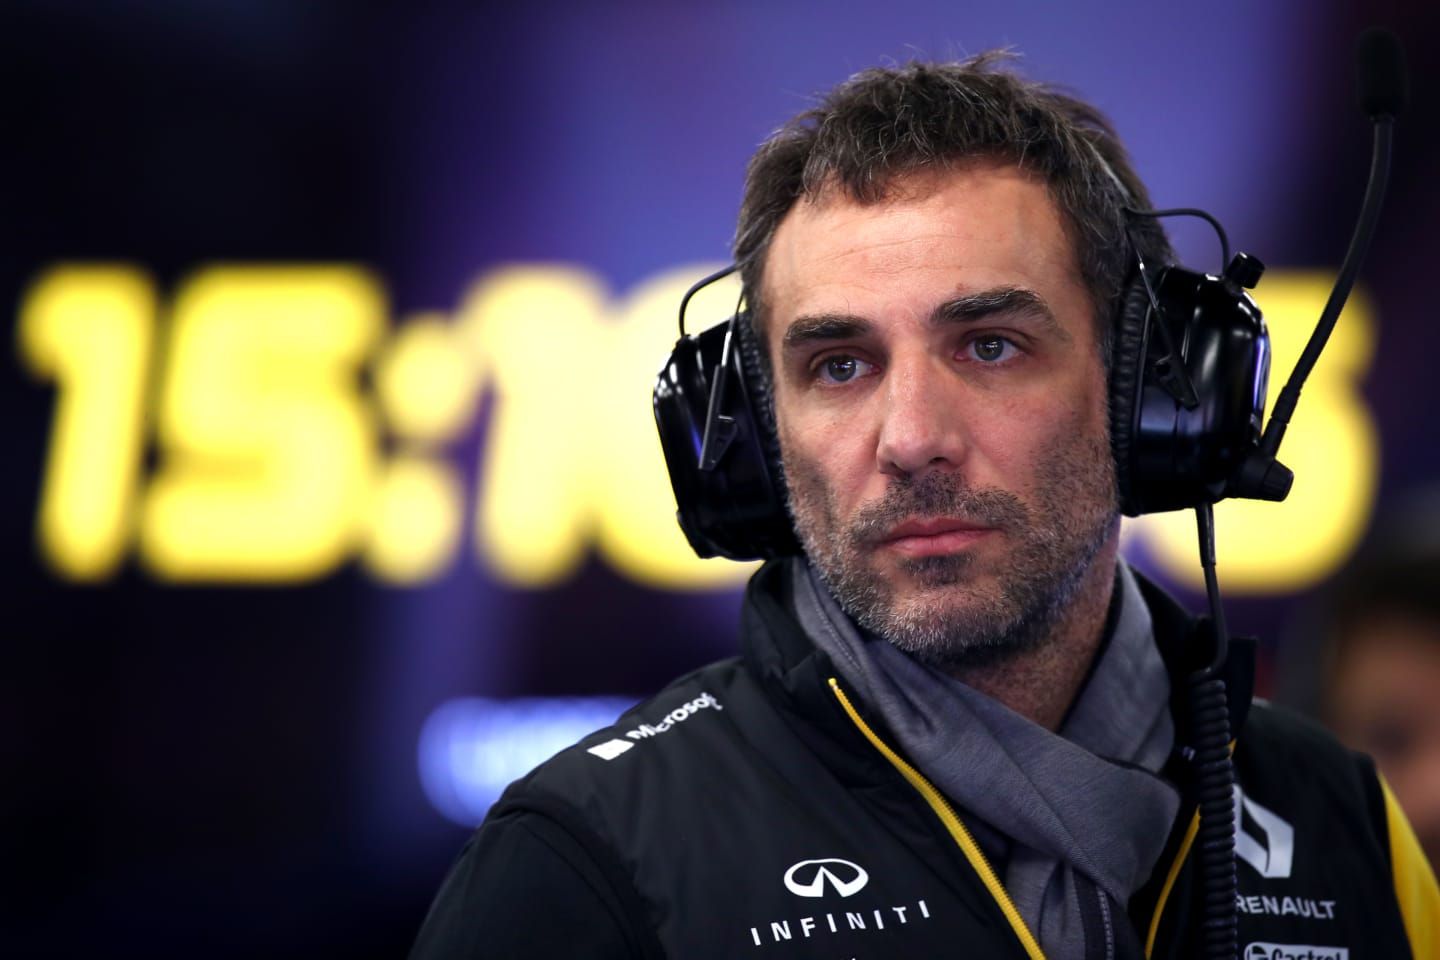 BARCELONA, SPAIN - FEBRUARY 19: Renault Sport F1 Managing Director Cyril Abiteboul looks on from